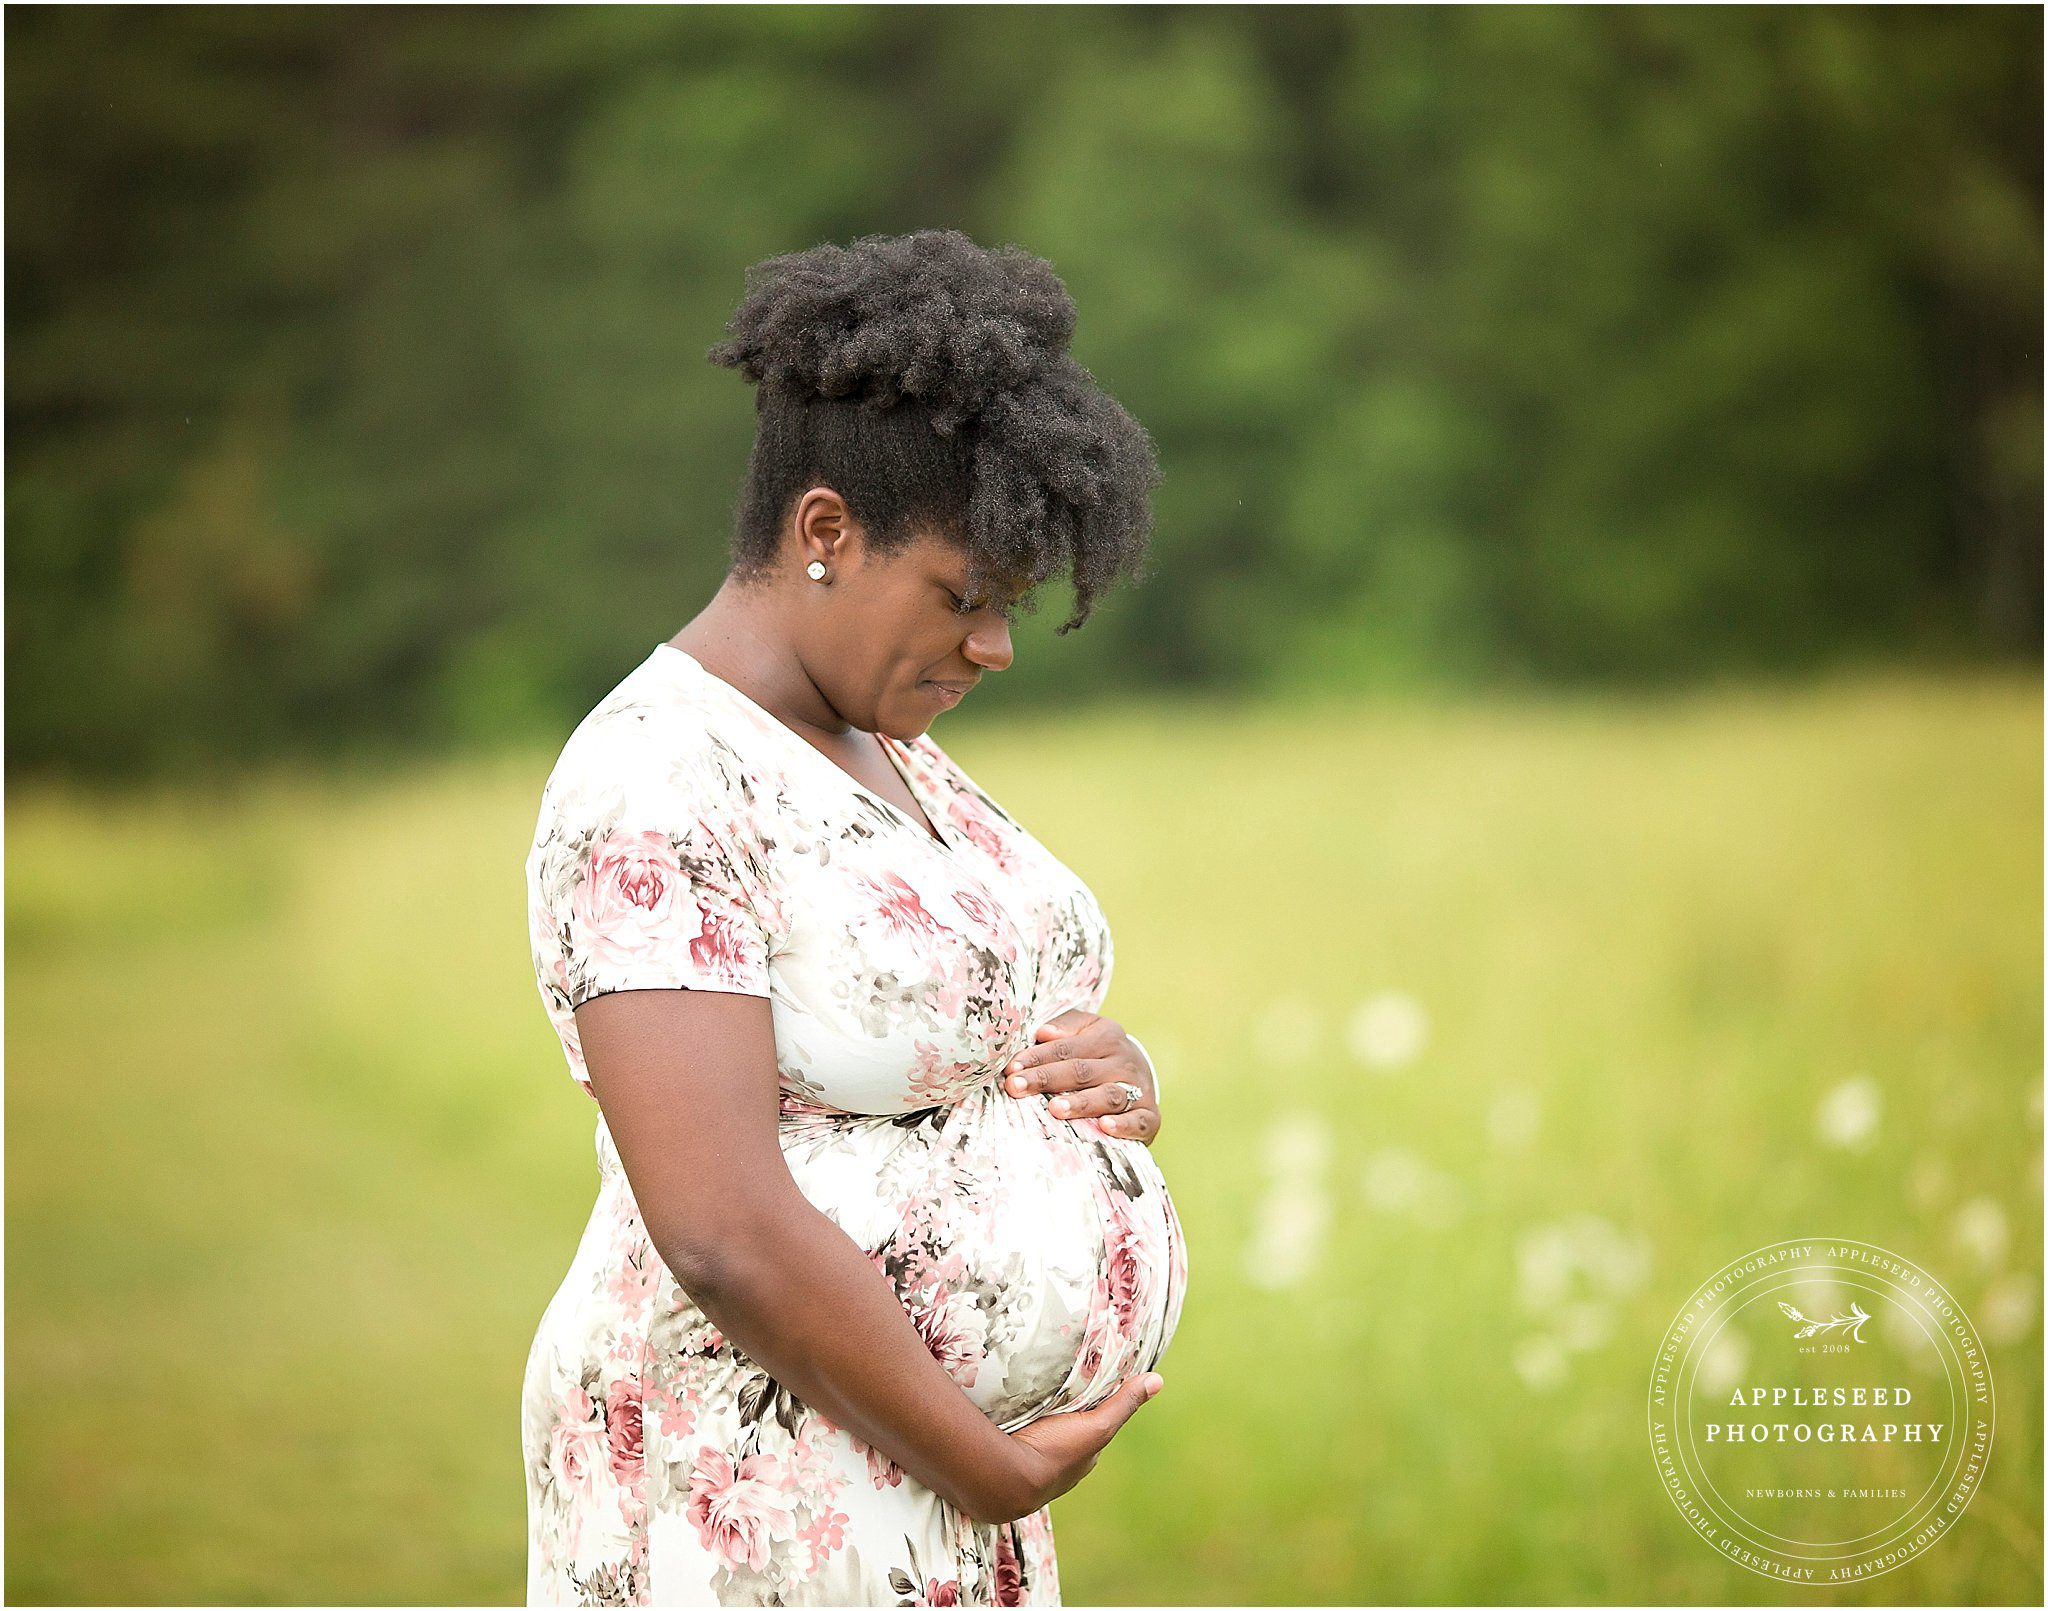 The Brown Family | Atlanta Maternity Photographer | Appleseed Photography